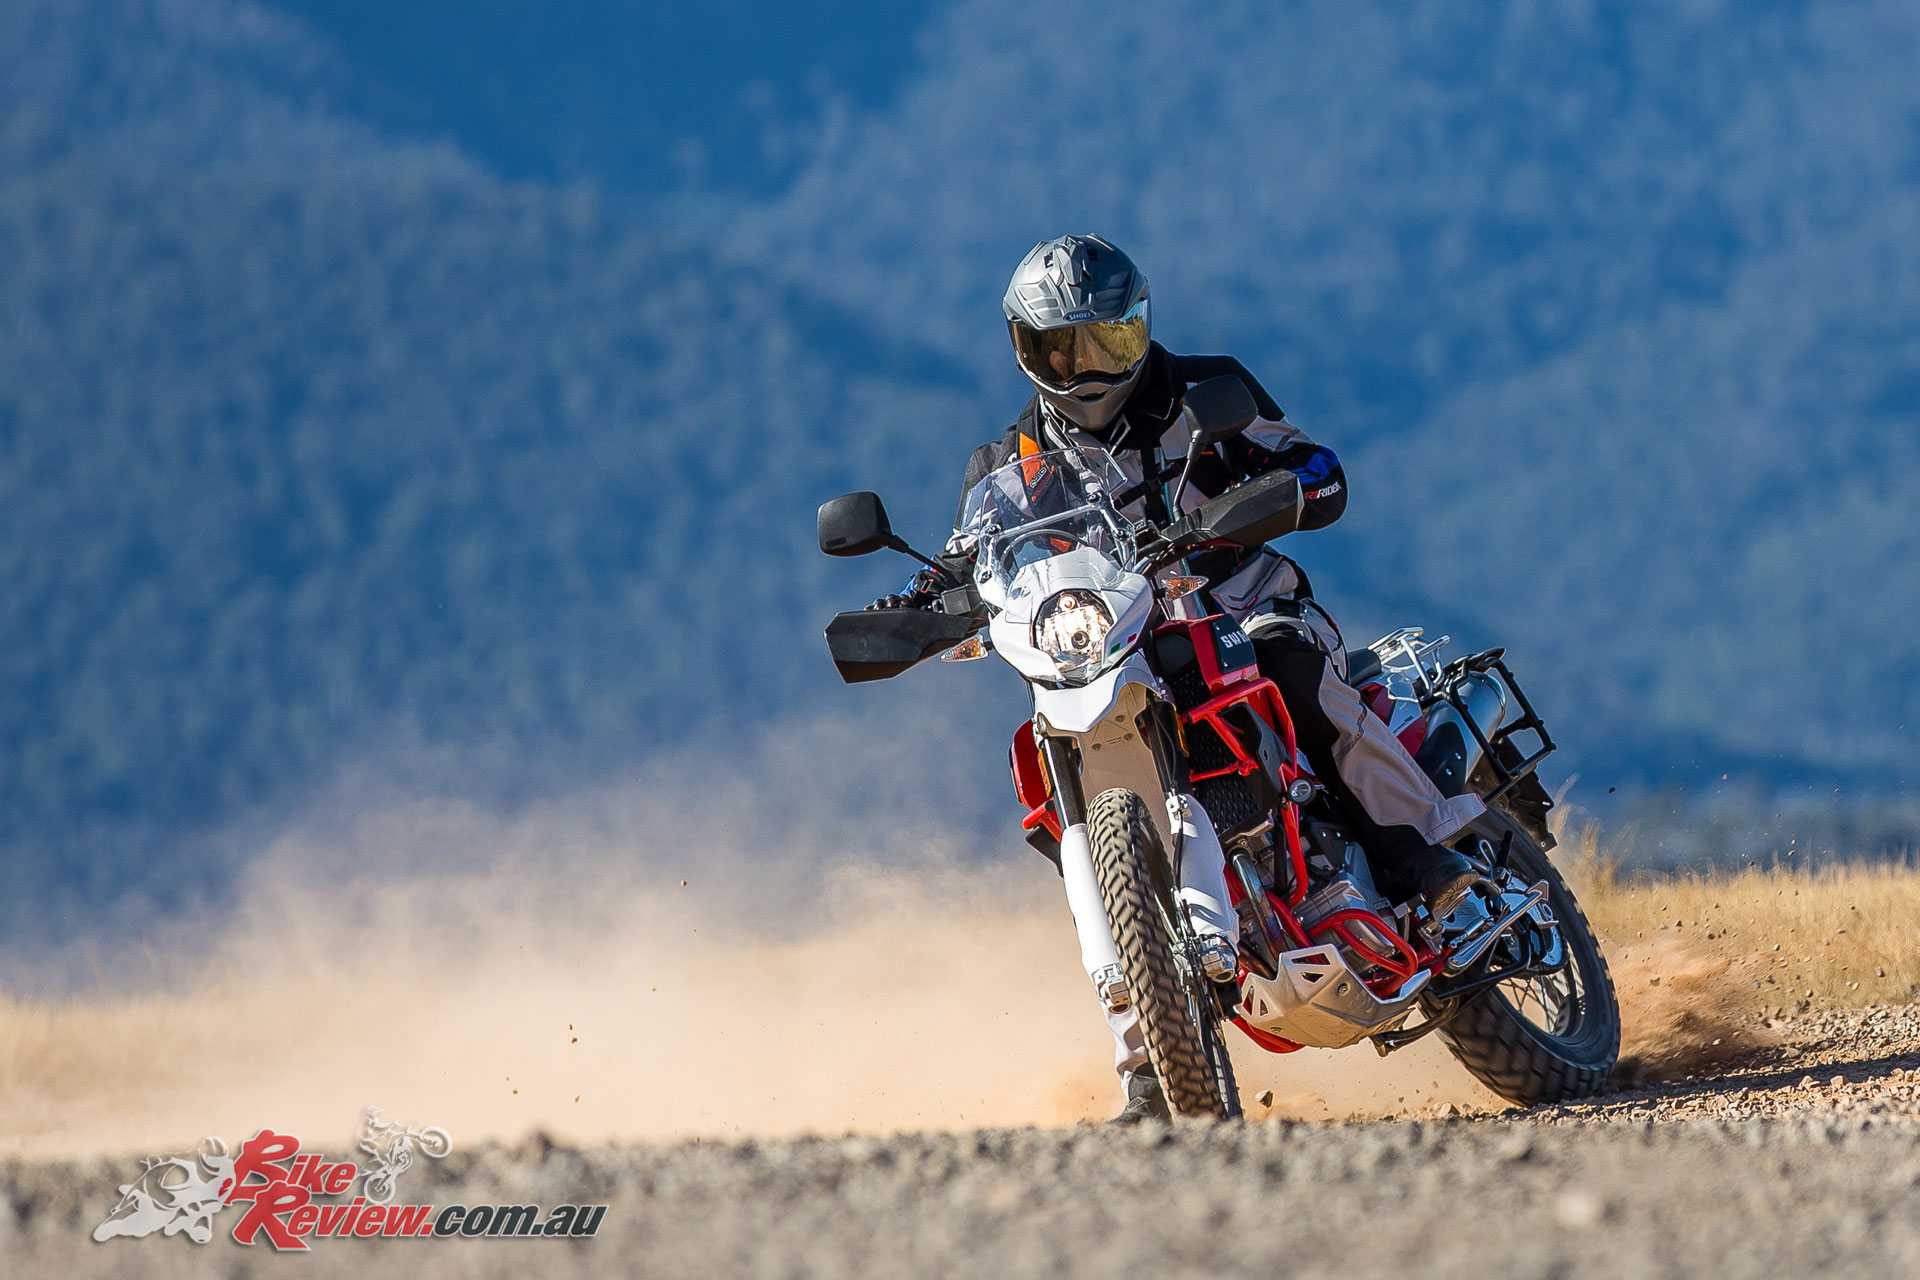 The Metzeler 3 Sahara tyres didn't offer heaps of grip for dusty stoney conditions, but what would...